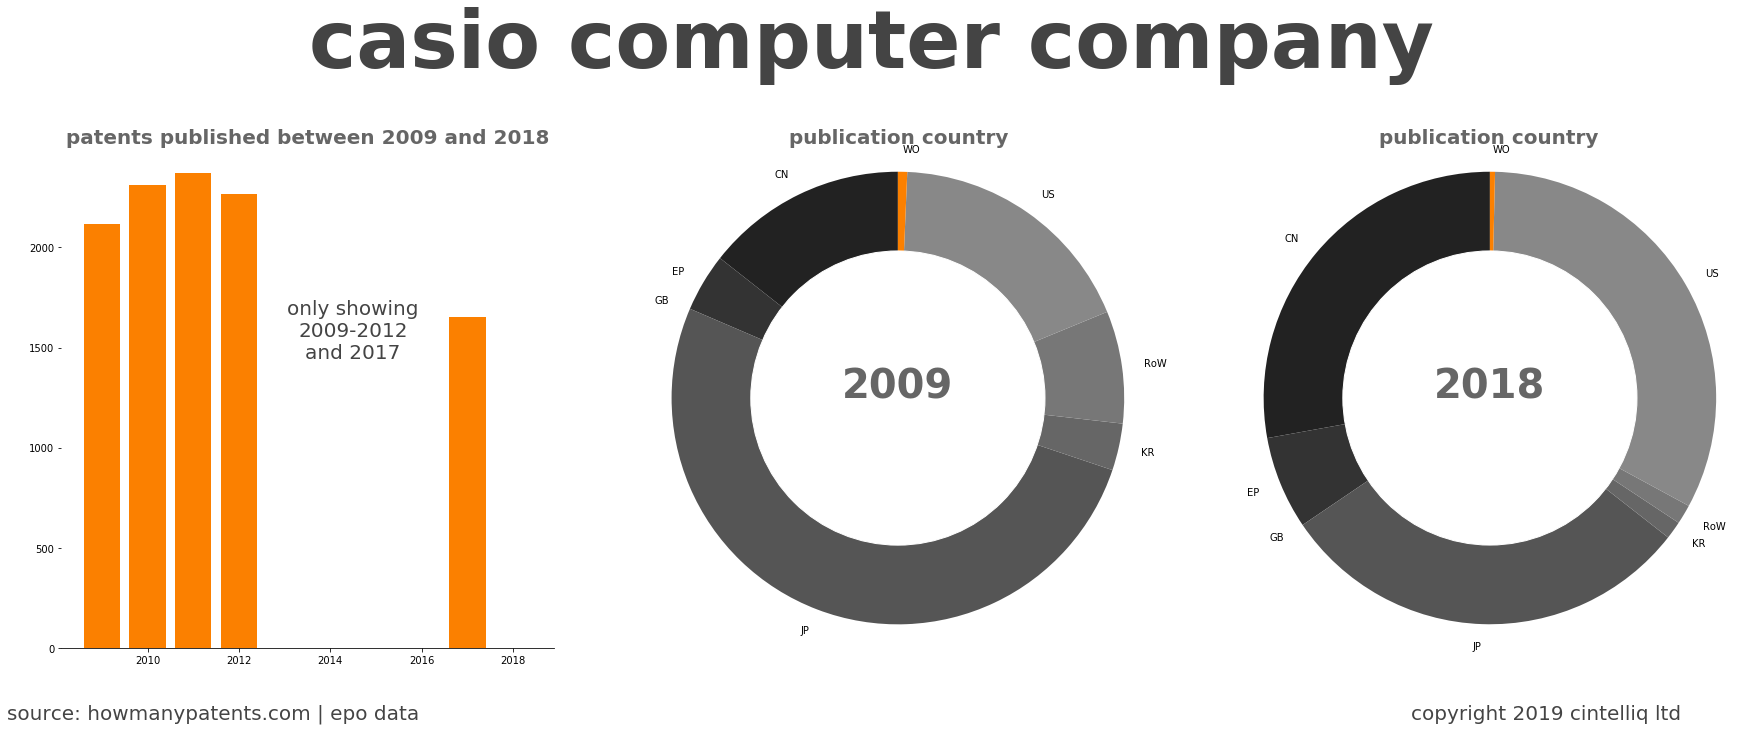 summary of patents for Casio Computer Company